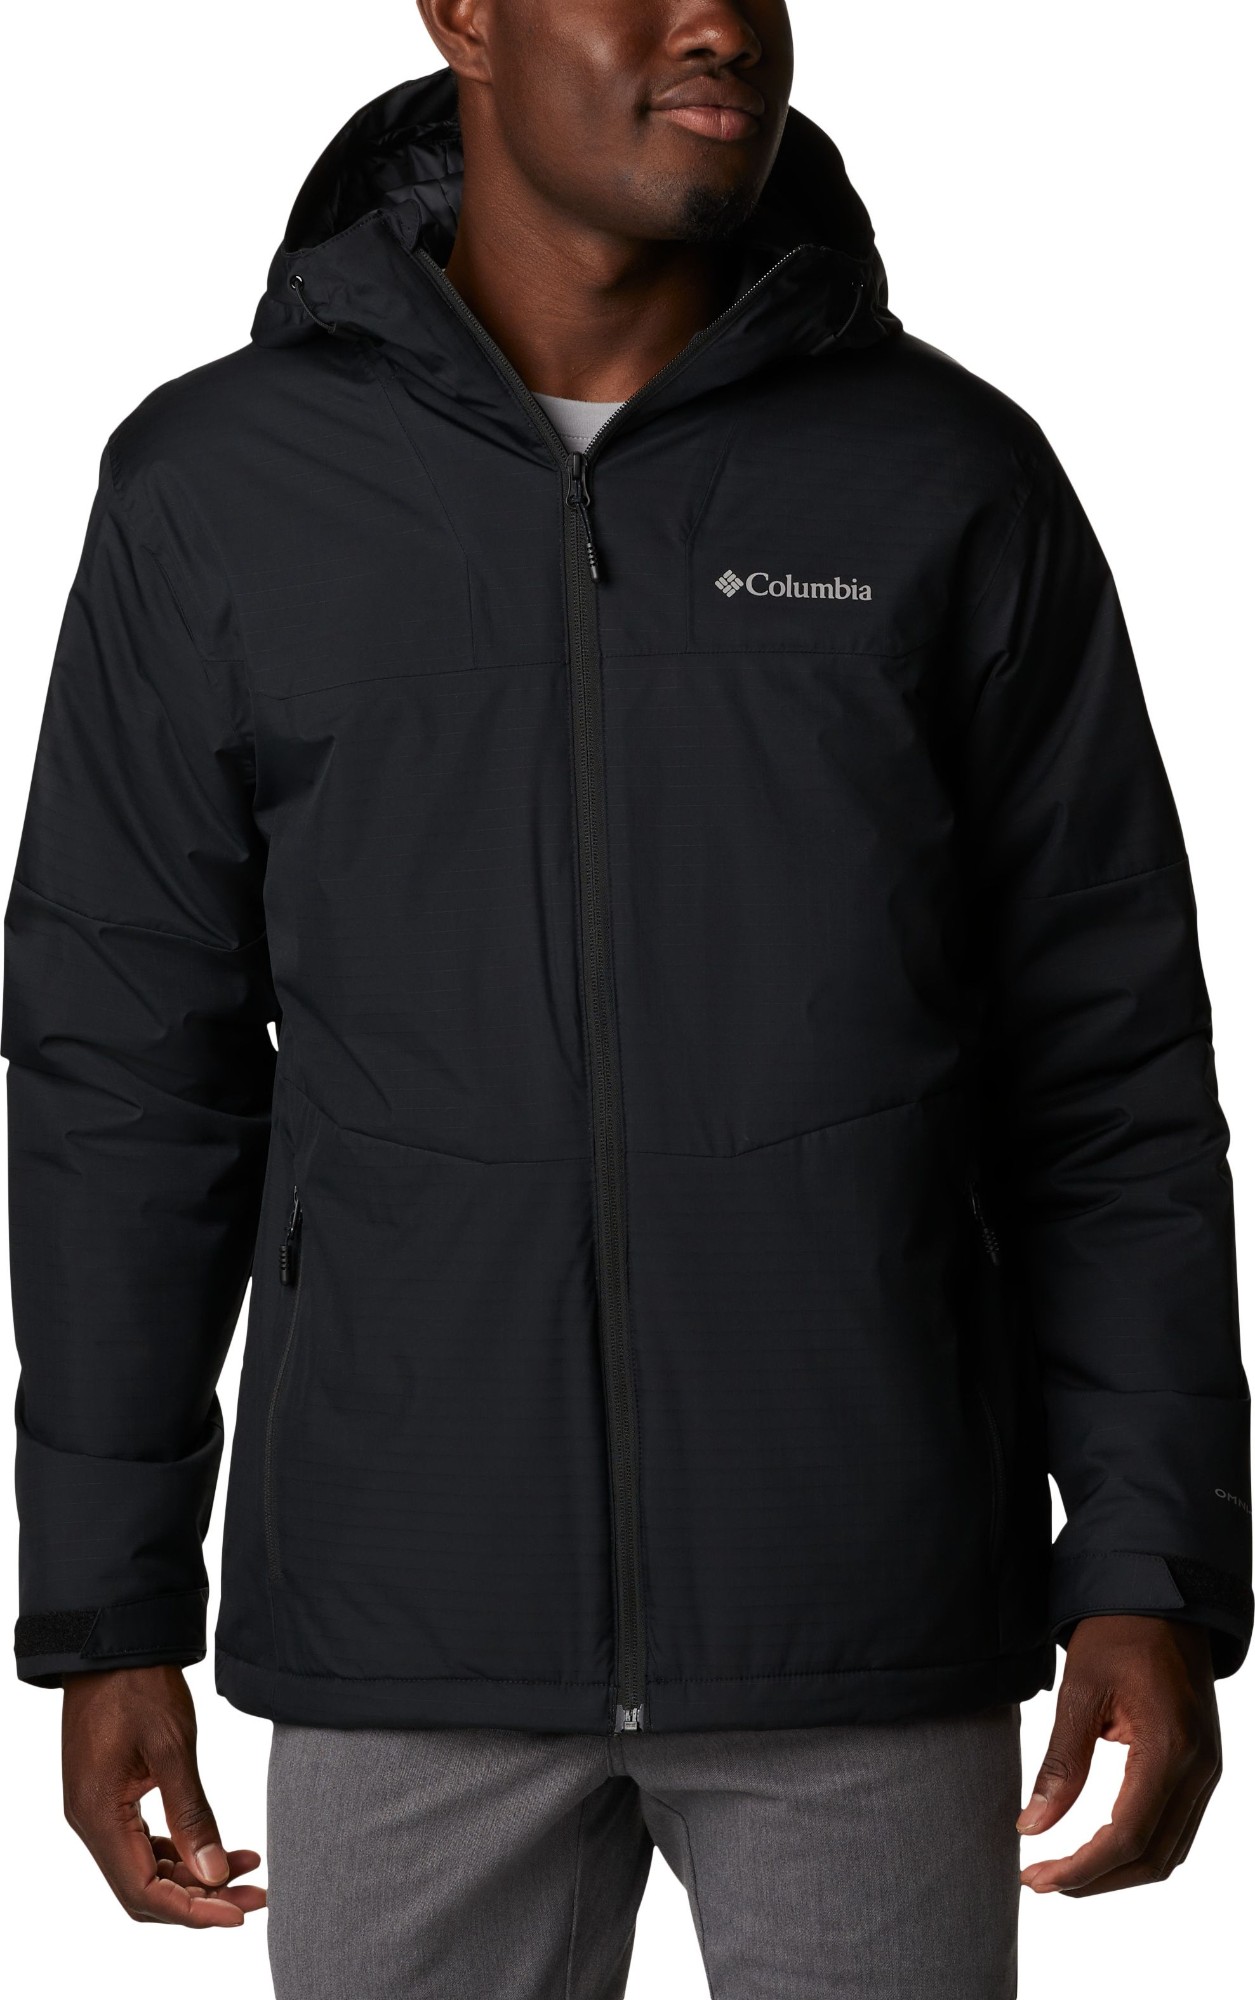 Columbia Point Park Insulated Jacket Men's Black M